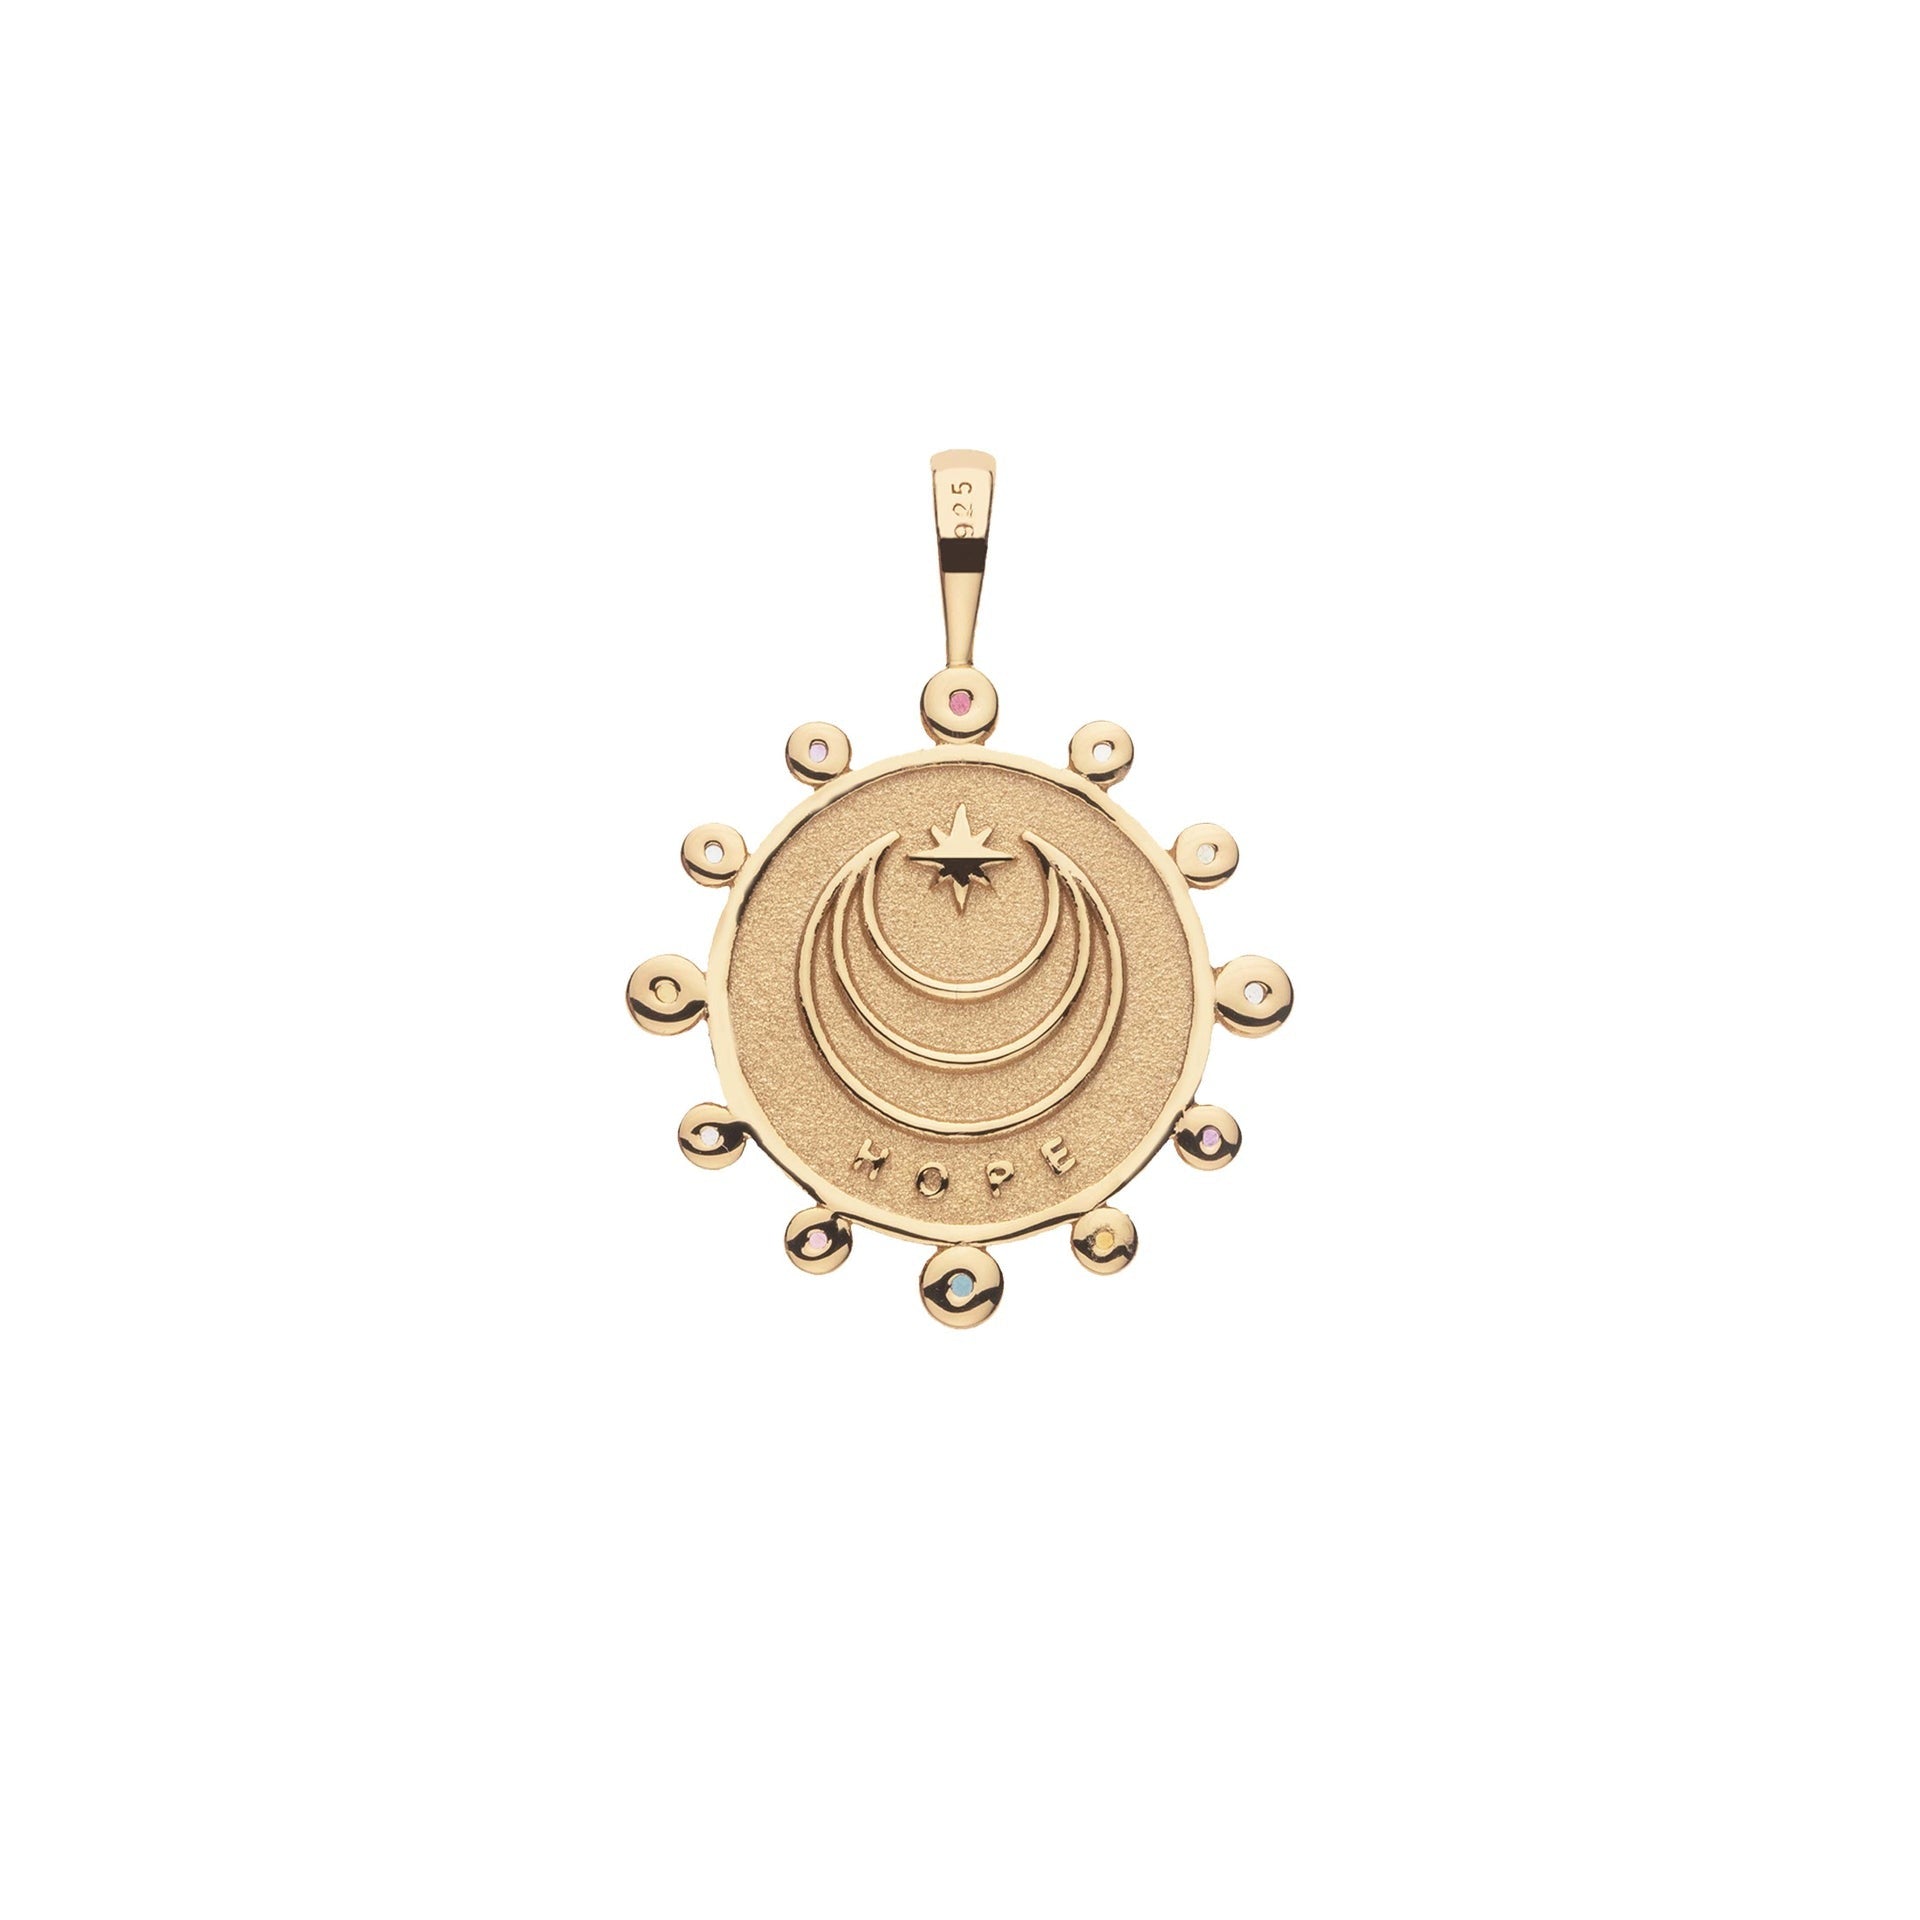 Jane Win HOPE Petite Embellished Coin Pendant Necklace